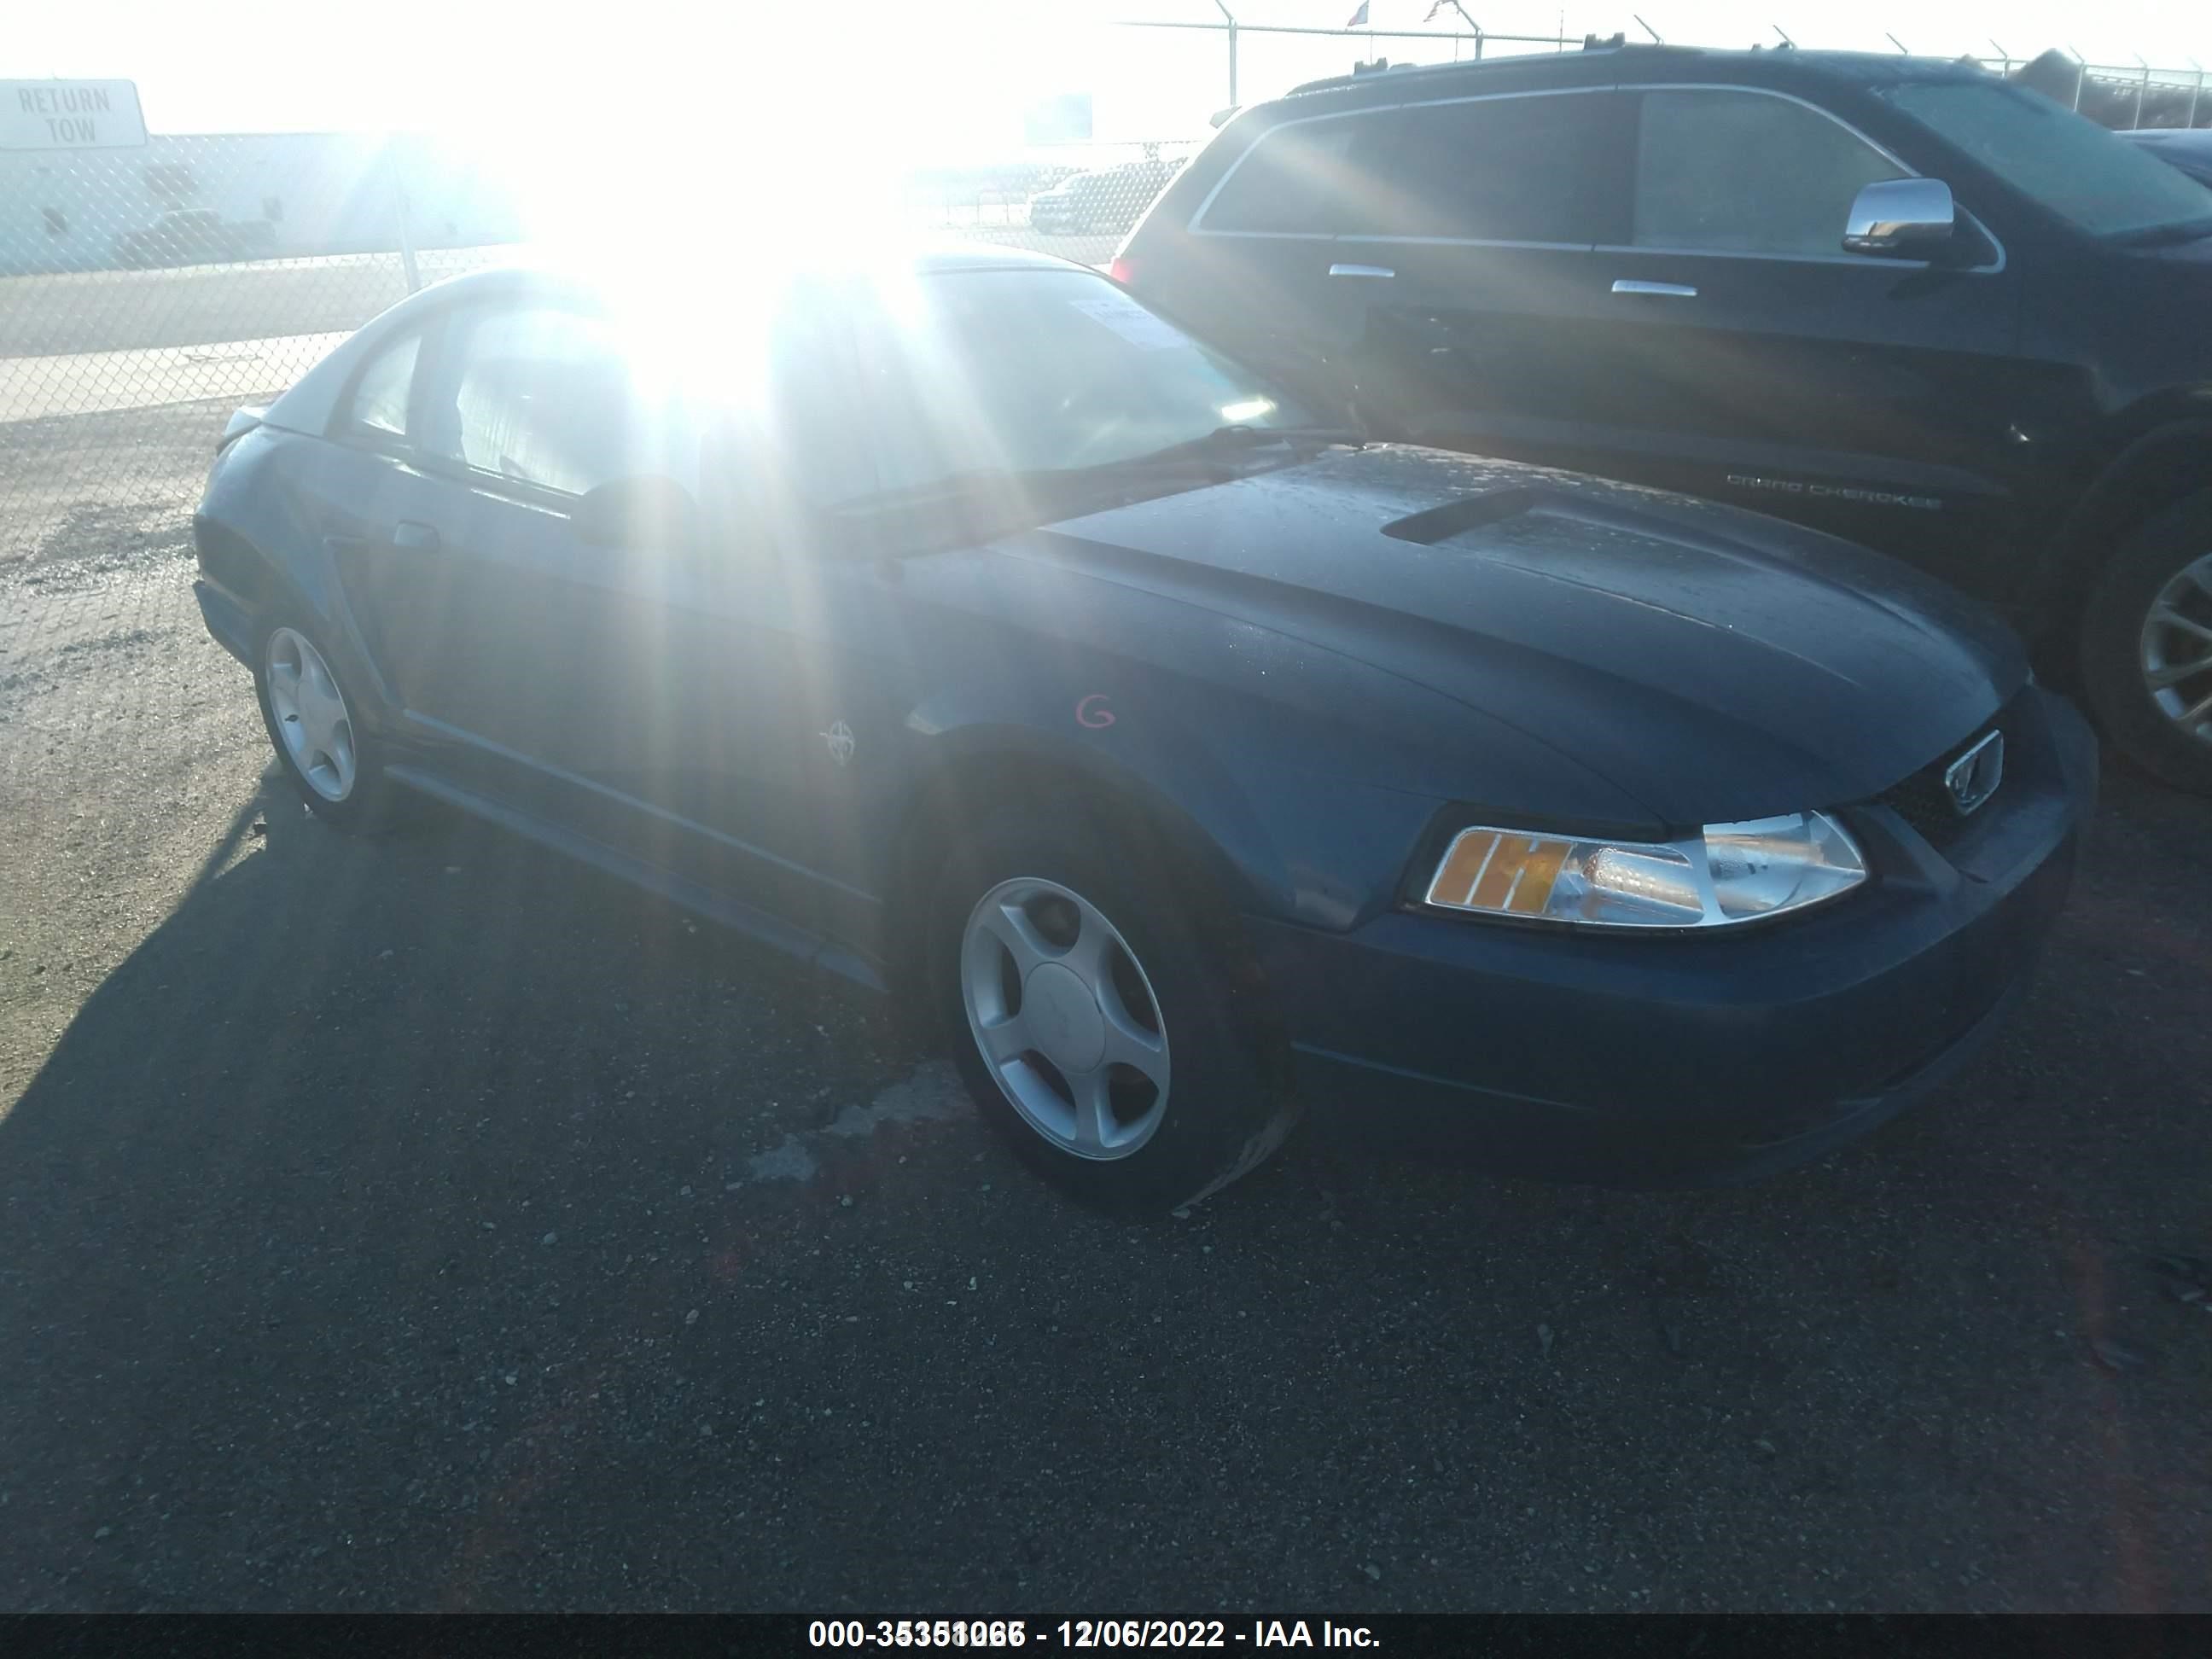 VIN: 1FAFP42X7XF178752 - ford mustang